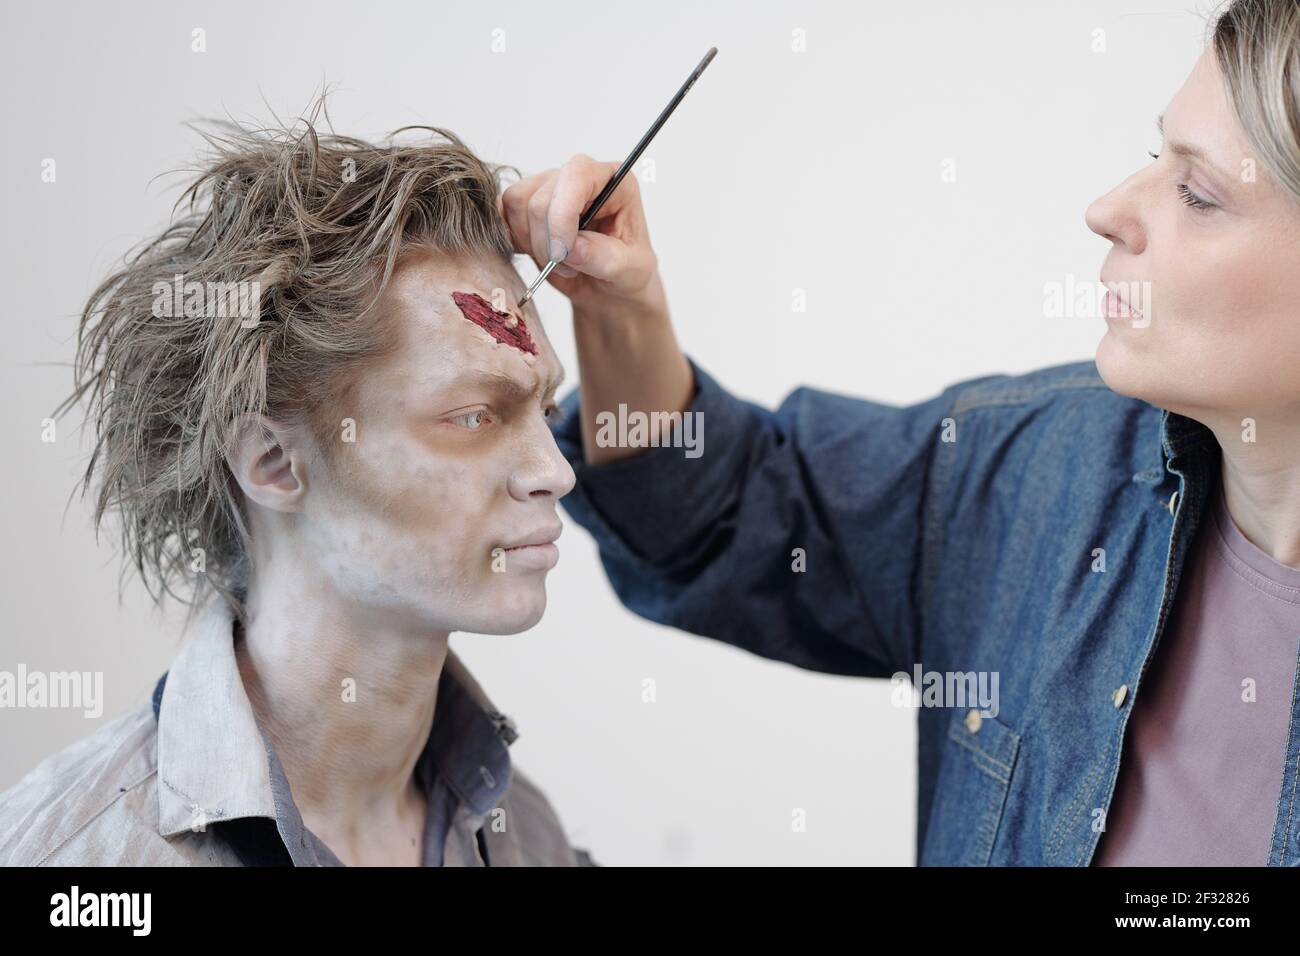 Contemporary visage artist with brush applying zombie makeup on face of young businessman or actor against white wall in office or studio Stock Photo